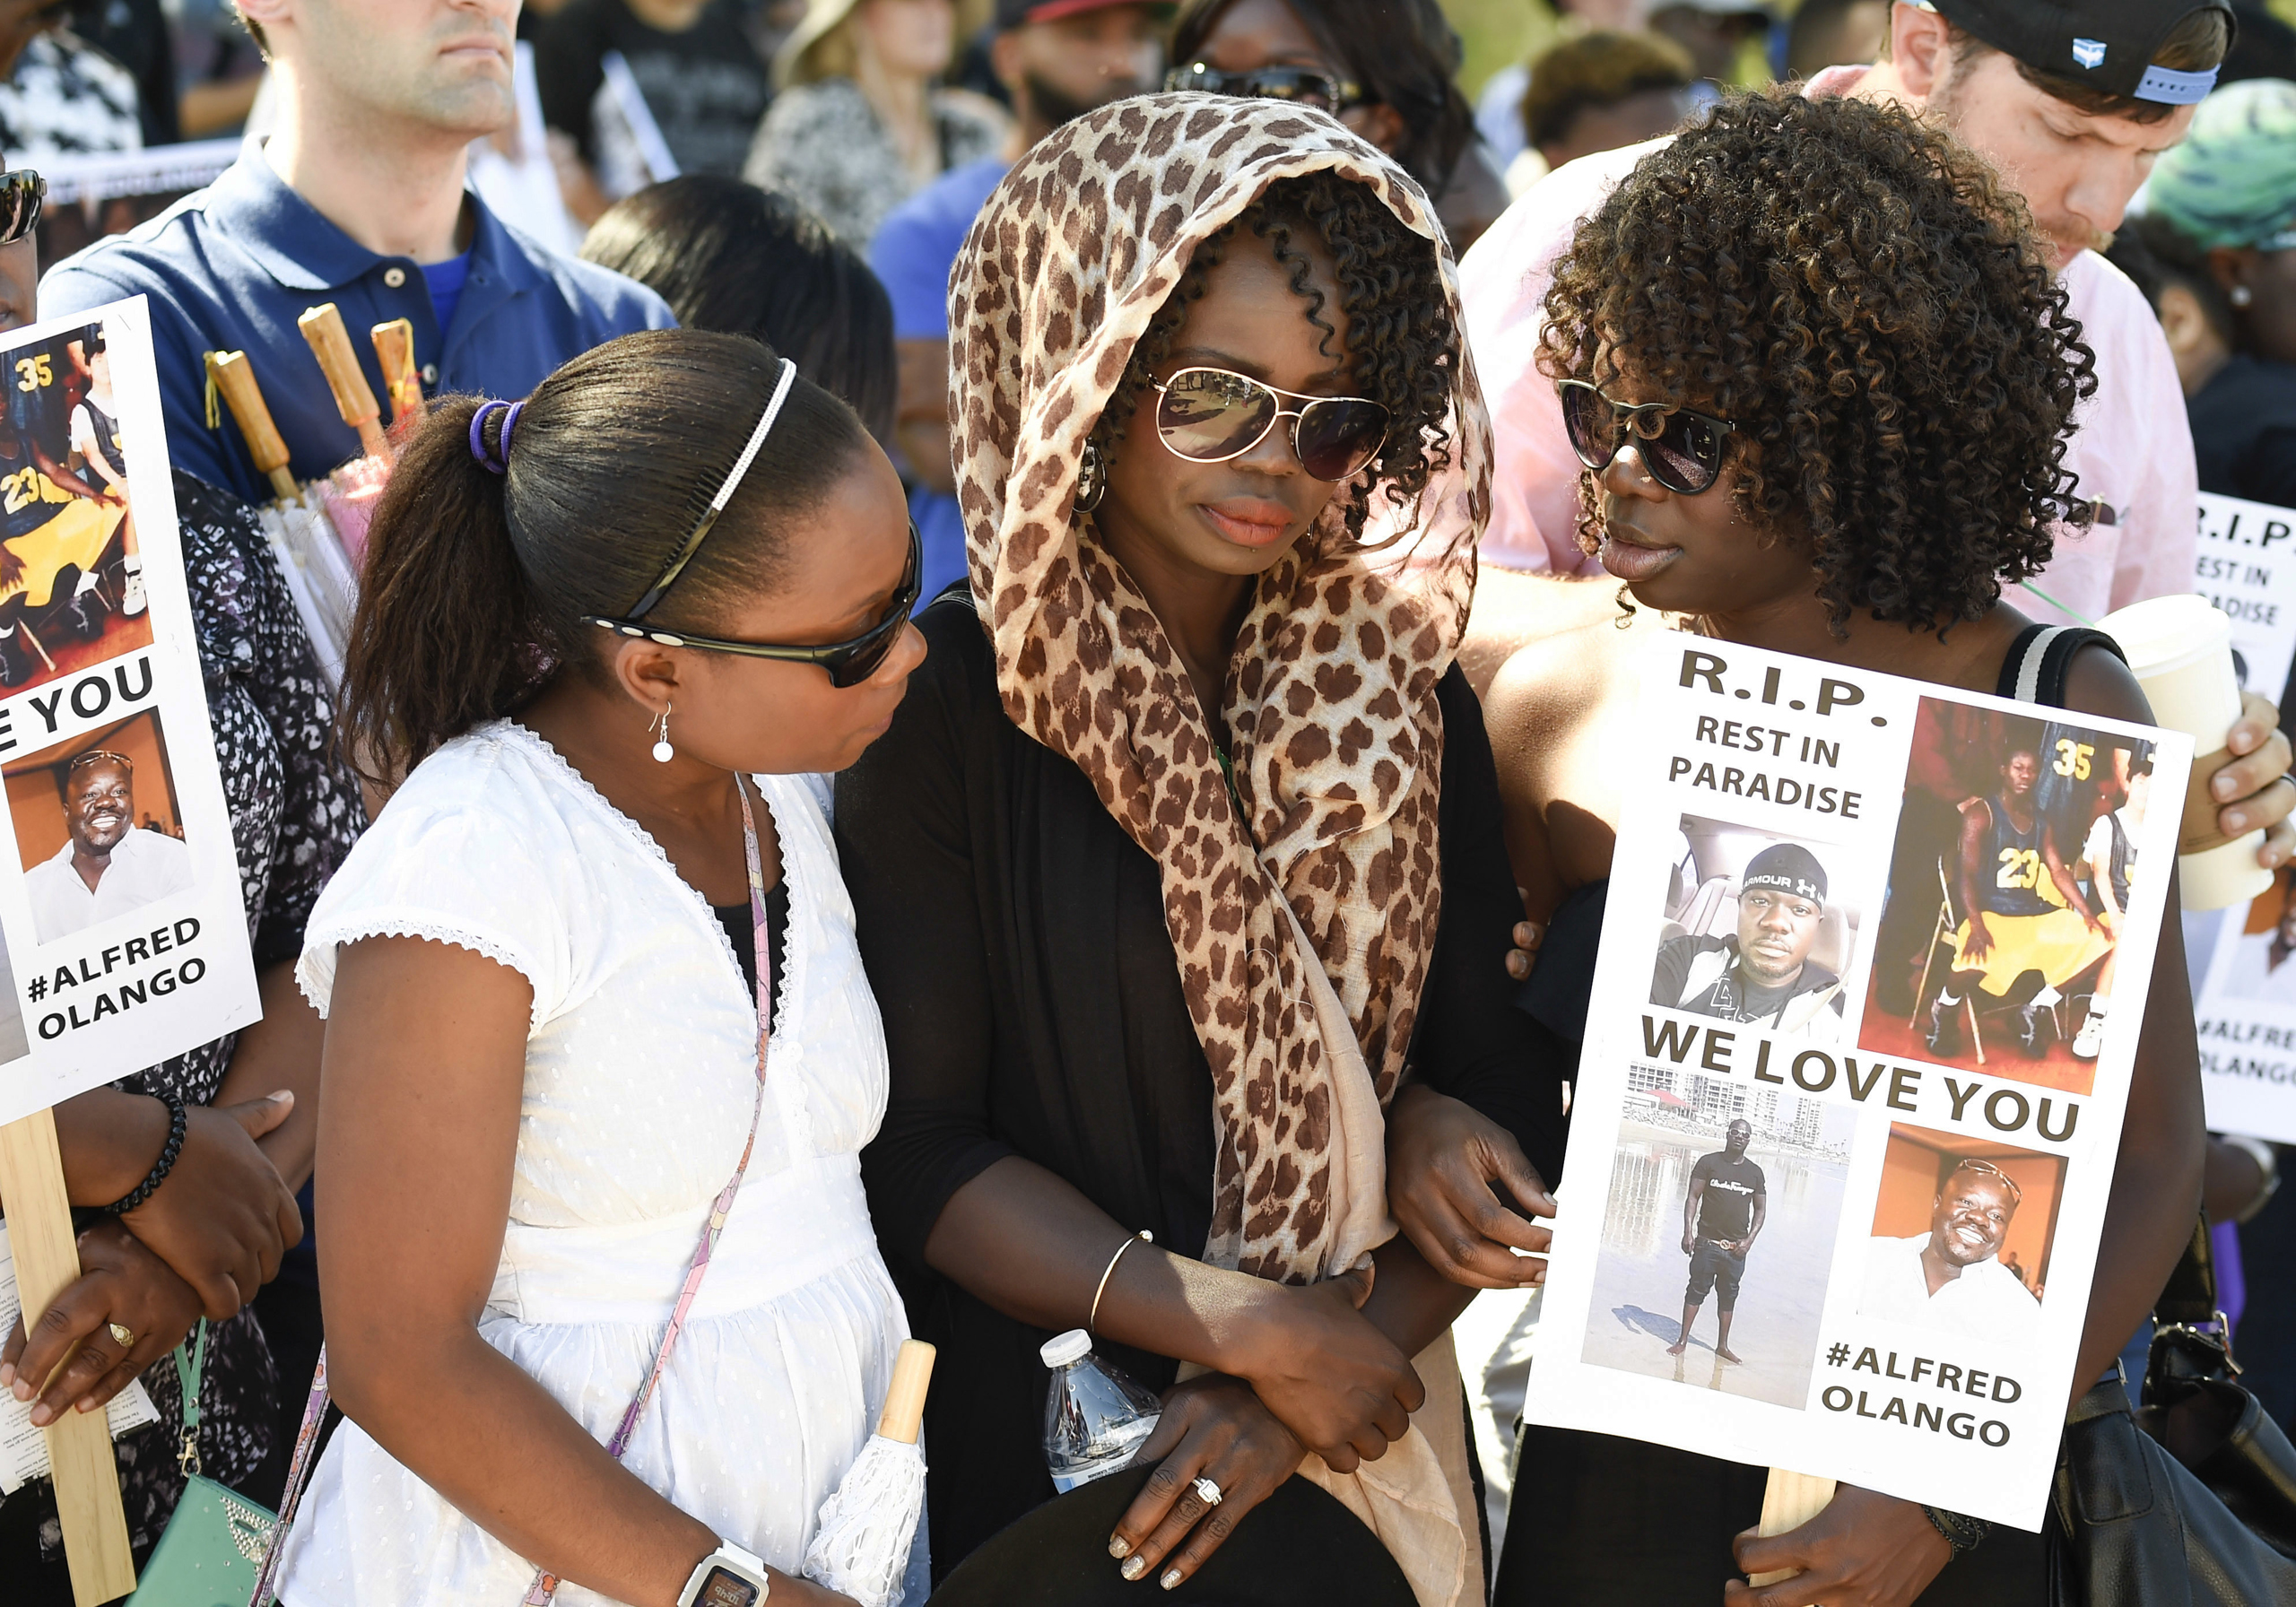 Winnie Olango, center, sister of Alfred Olango, is consoled by two friends before a march in reaction to the fatal police shooting of her brother, in El Cajon, Calif., on Oct. 1, 2016. (Denis Poroy—AP)